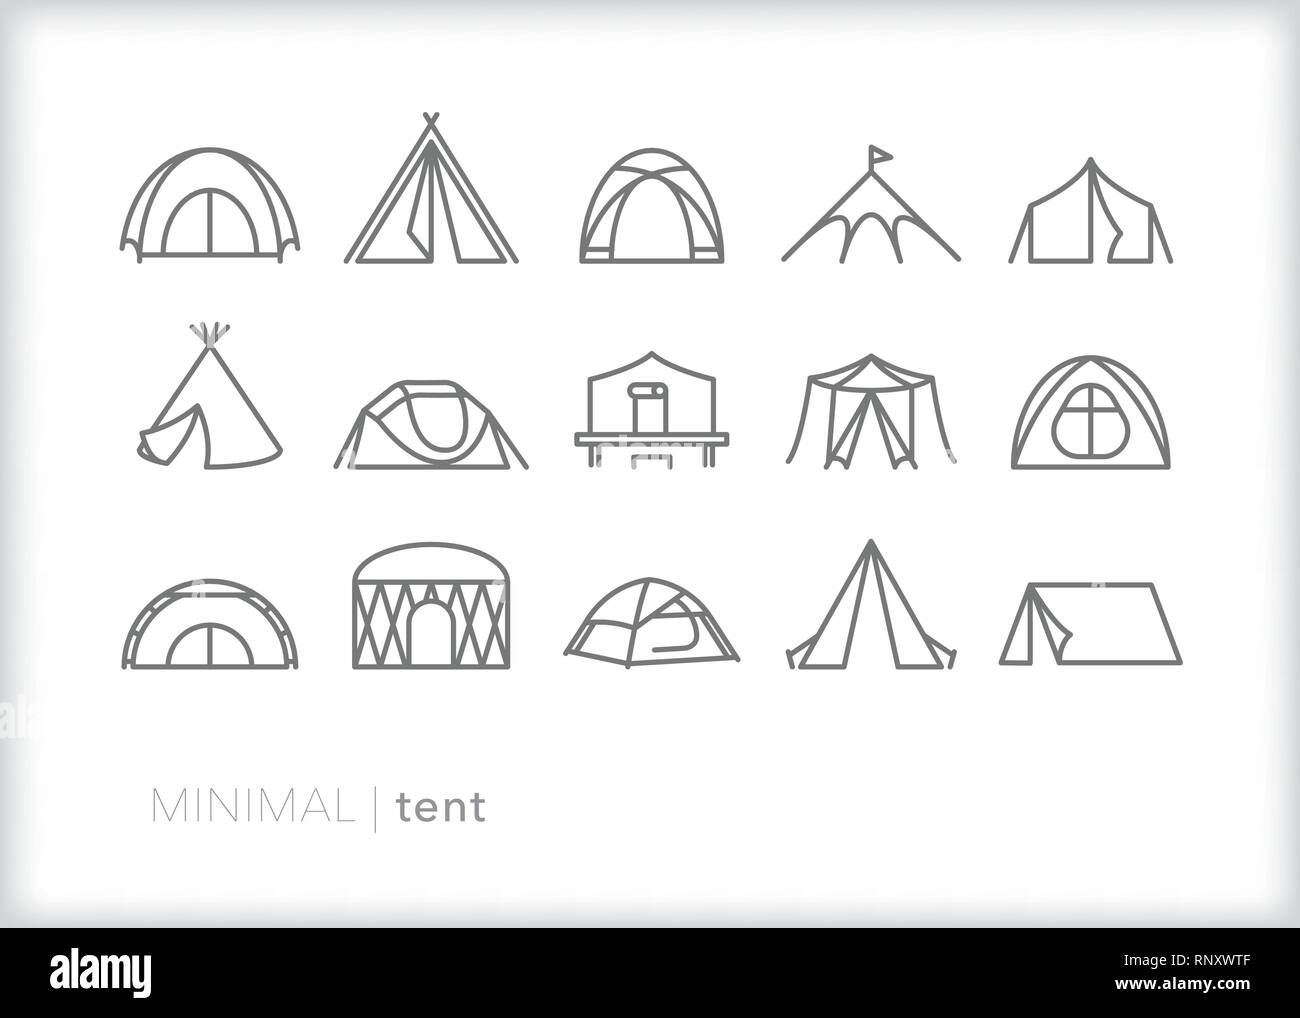 Set of 15 tent line icons for outdoor camping and living Stock Vector